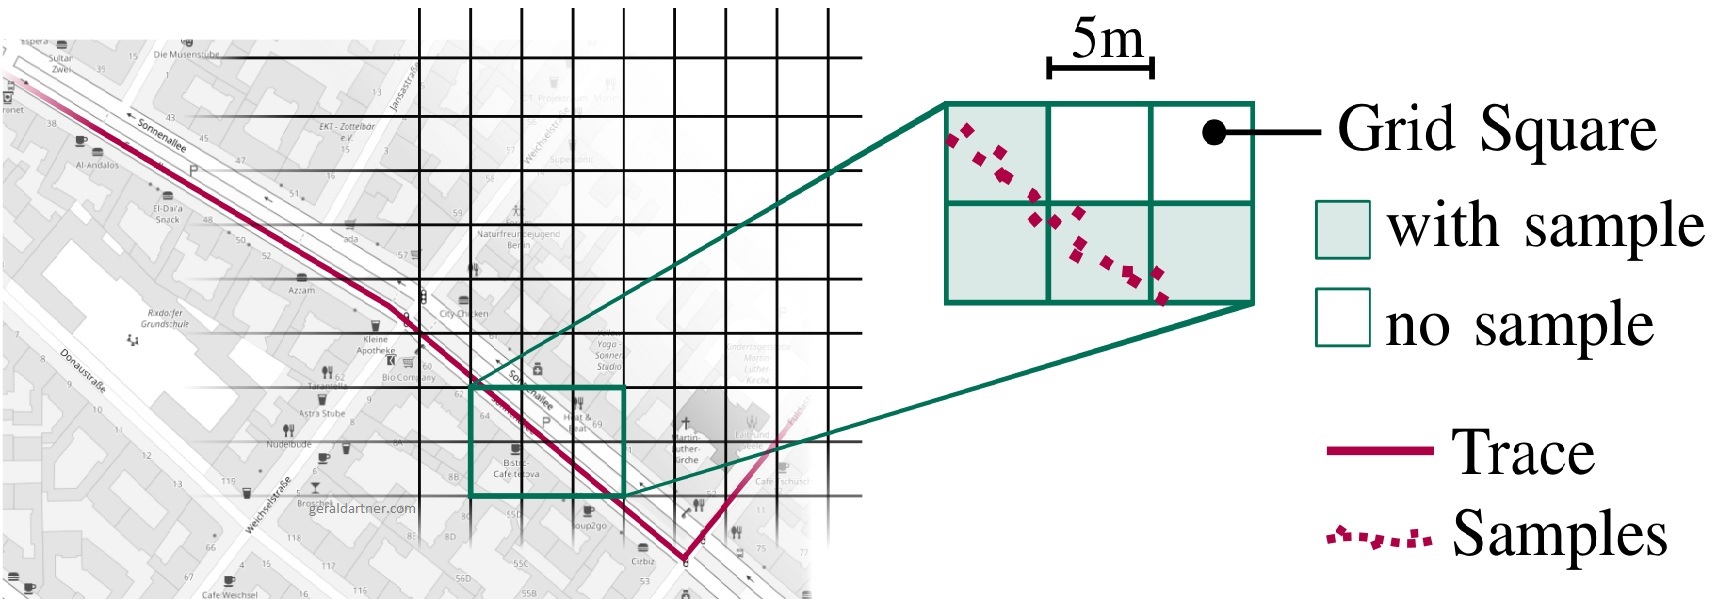 Evaluating Coverage Based on Grid Squares